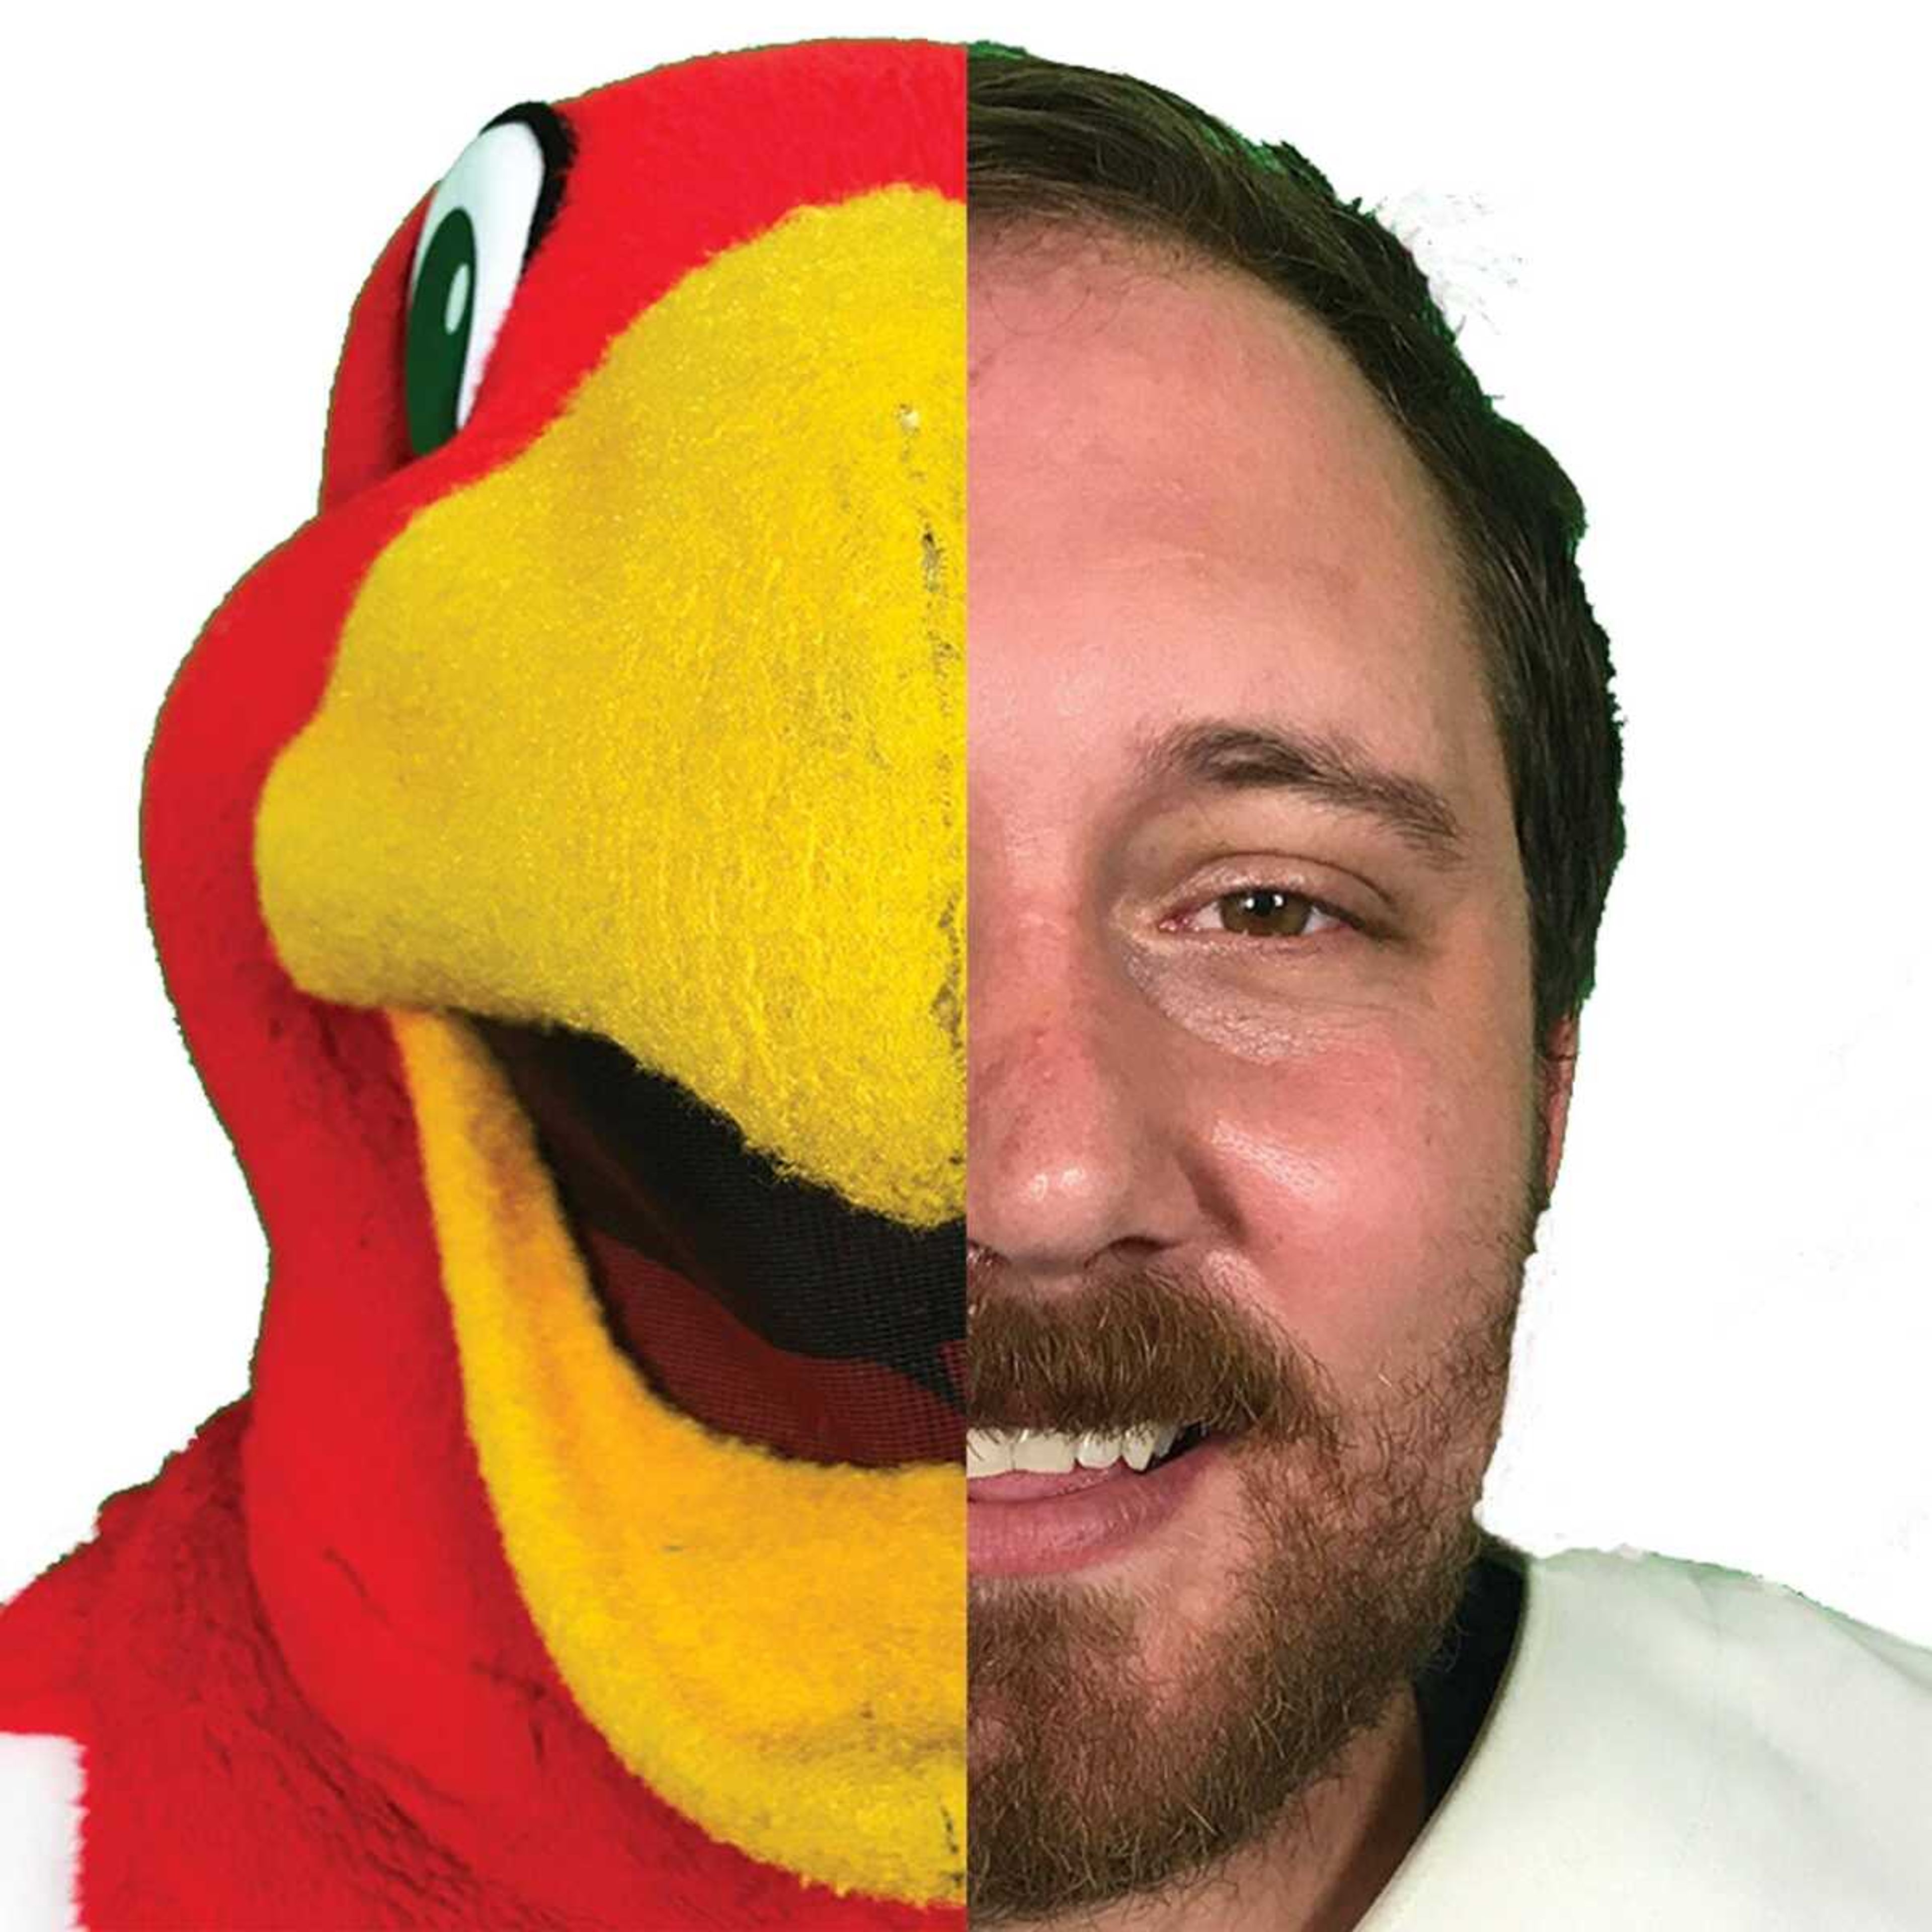 Rowdy the Redhawk was revealed as recent graduate, Nik Weber. 